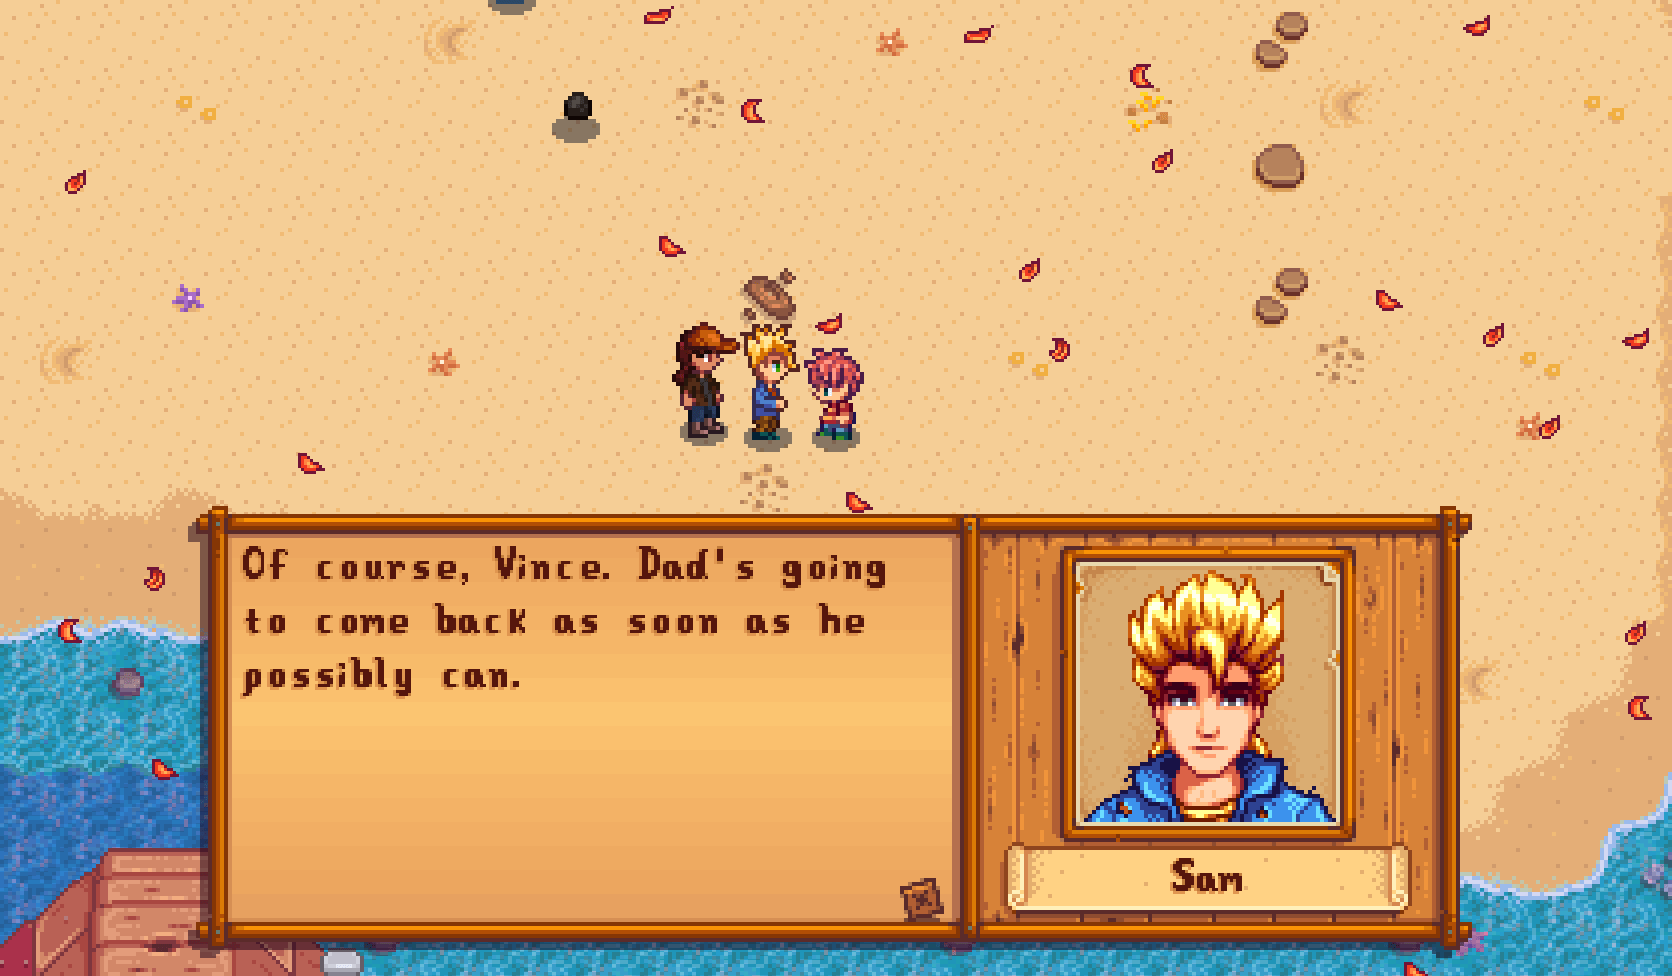 Stardew Valley Sam Guide and Tips for Gifts, Schedule and Heart Events